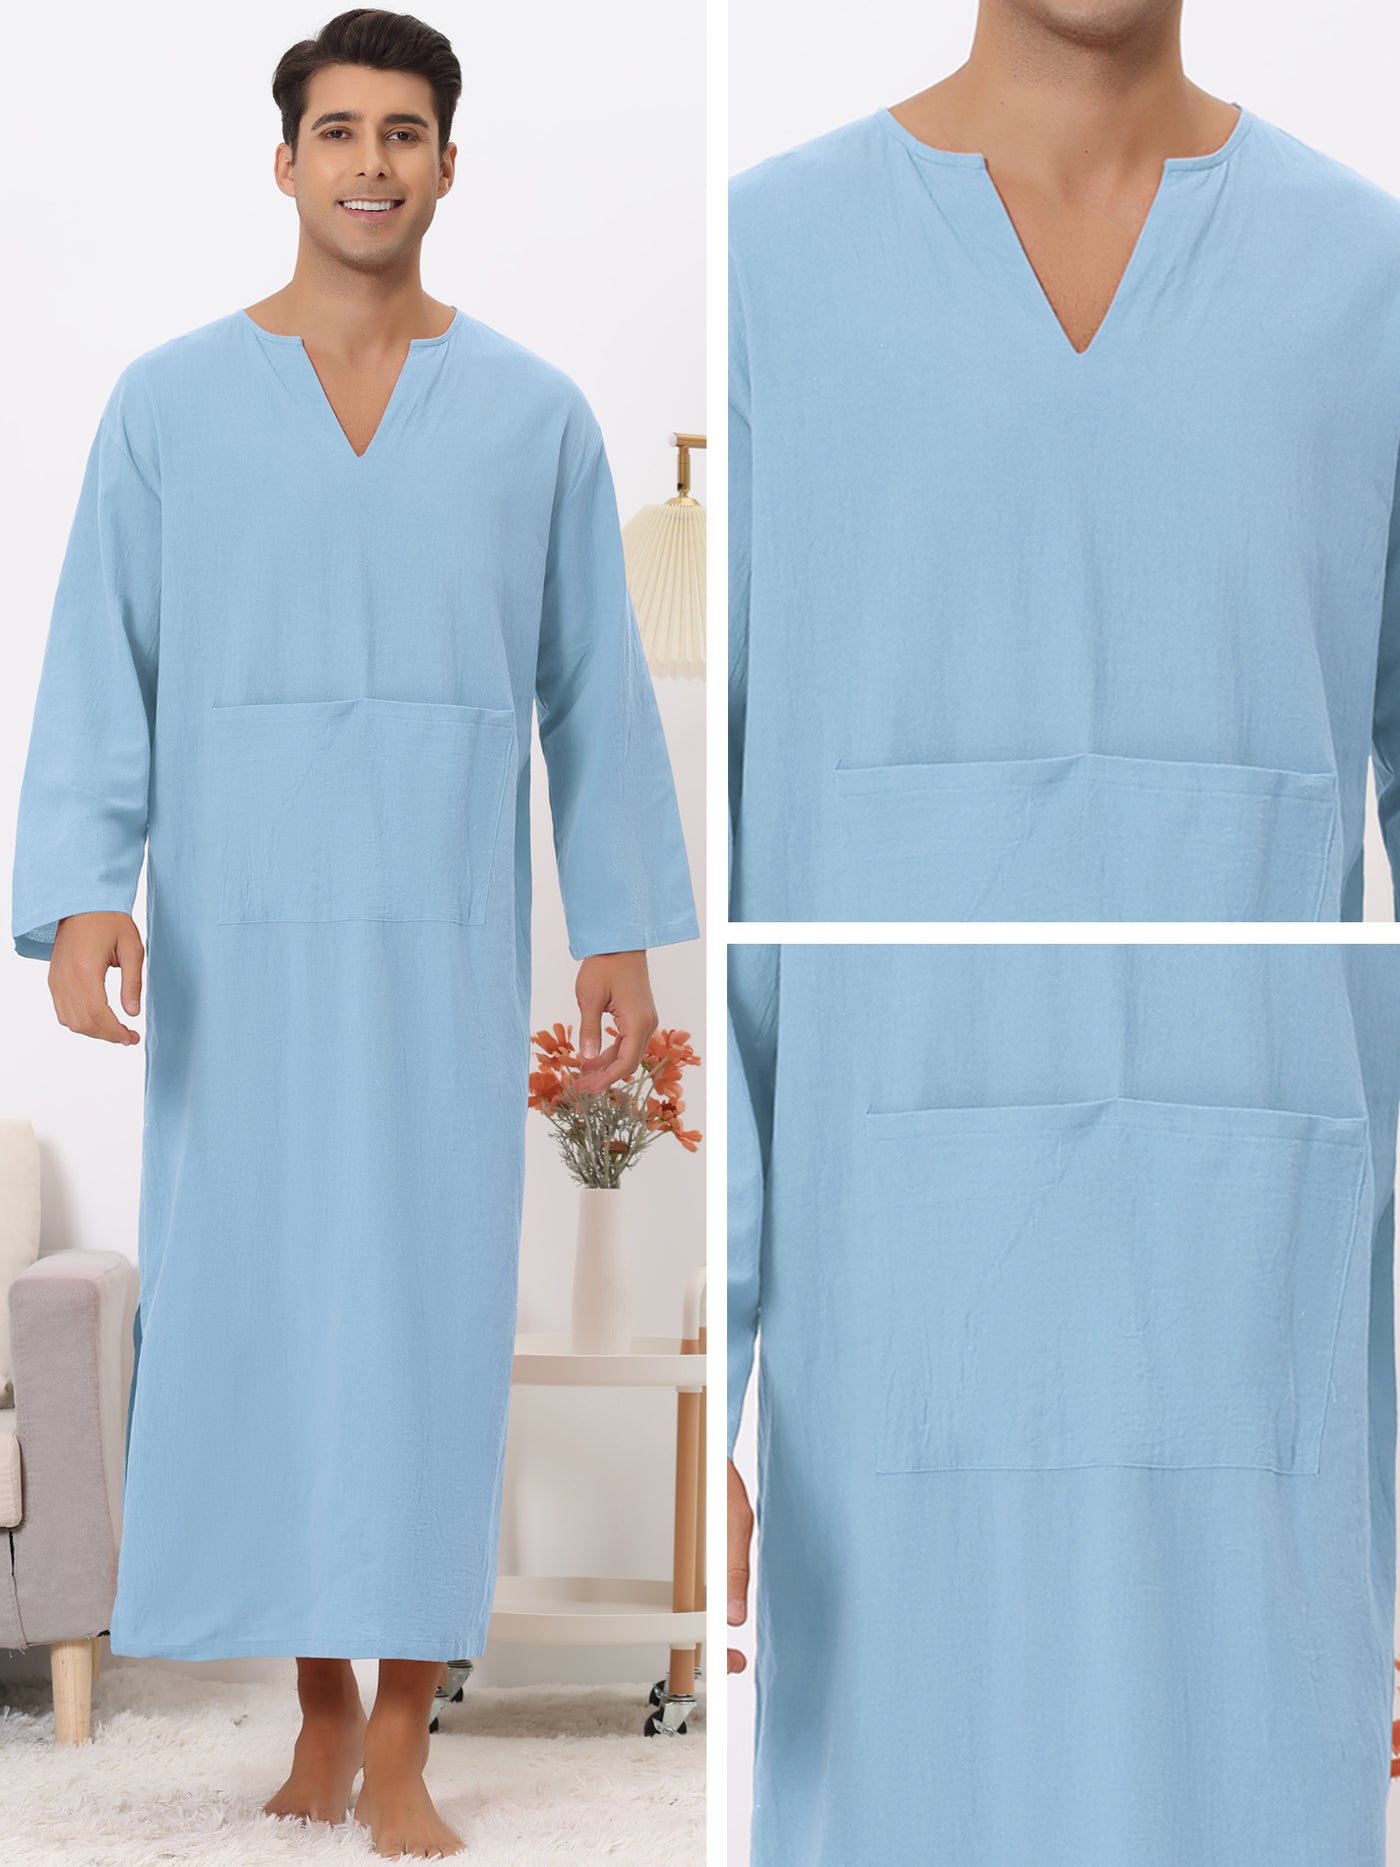 Bublédon Nightgown for Men's Loose Fit Sleepwear Long Sleeves V Neck Comfy Nightshirts